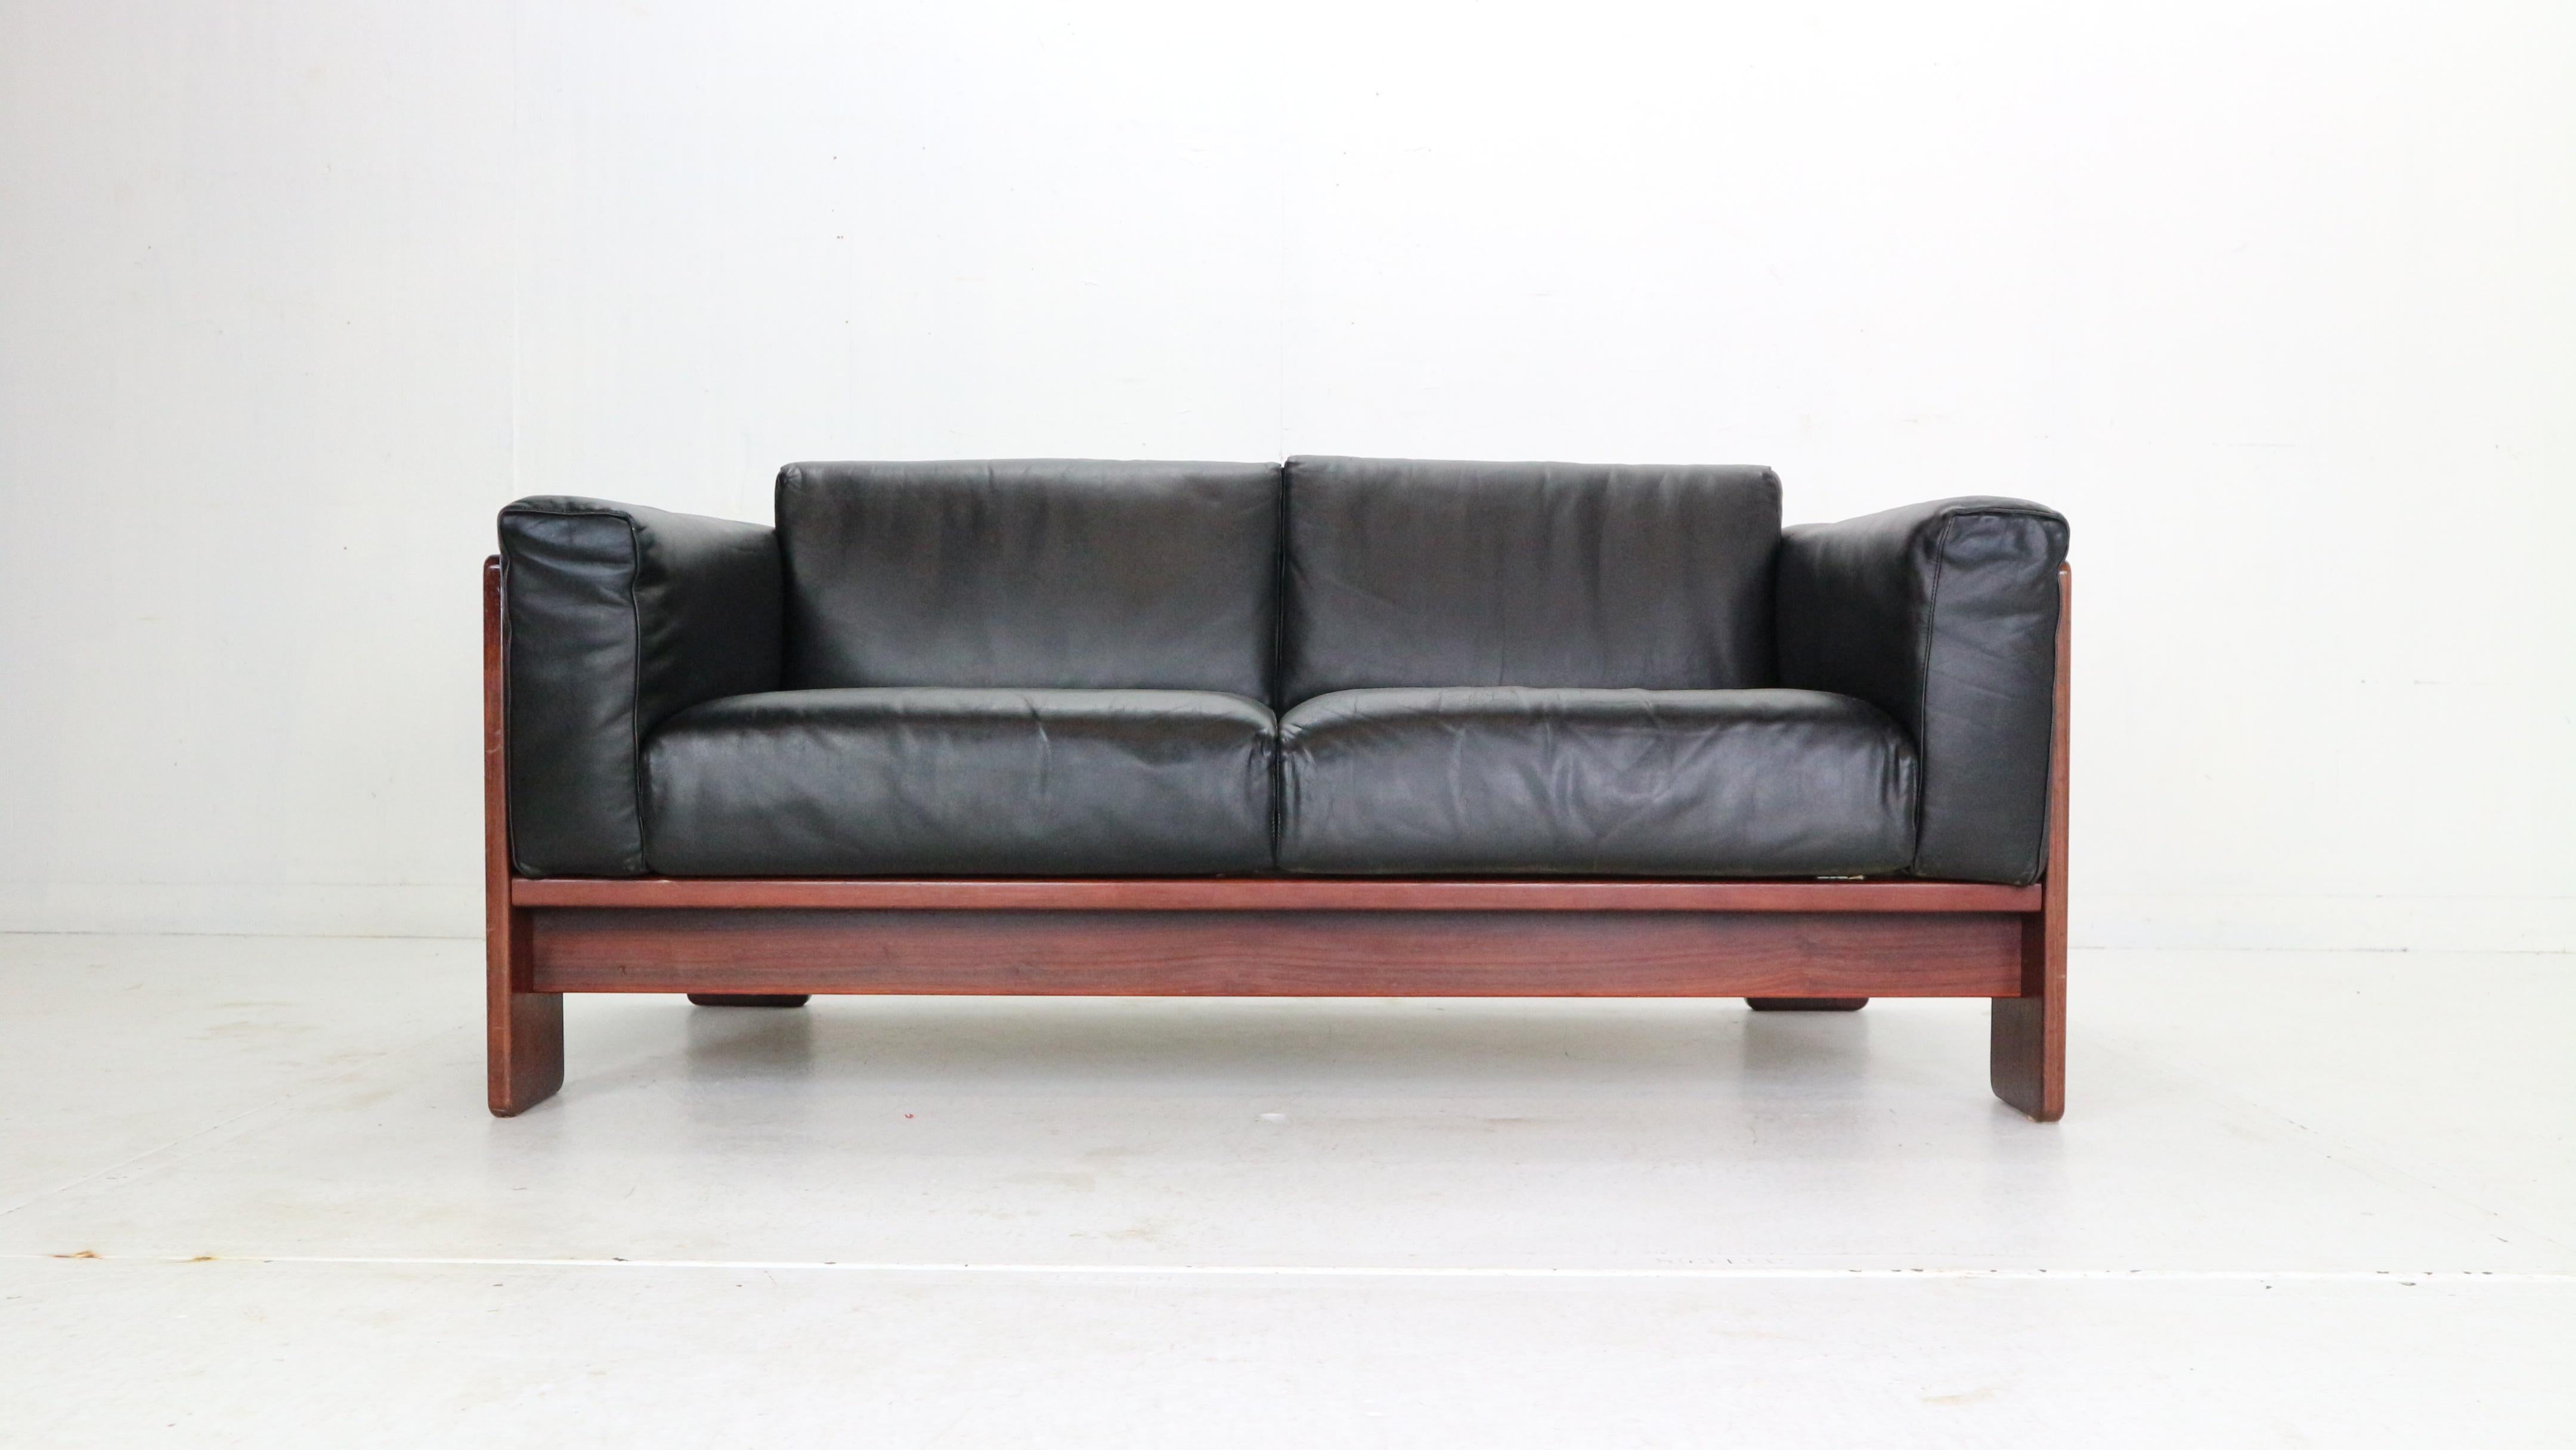 Two-seater sofa was produced by Knool in 1960s and designed by Tobia Scarpa.
Mid-Century Modern period Italian design item.
Tobia Scarpa designed the Bastiano series for the experimental design laboratory of Gavina in 1960. About the result Gavina